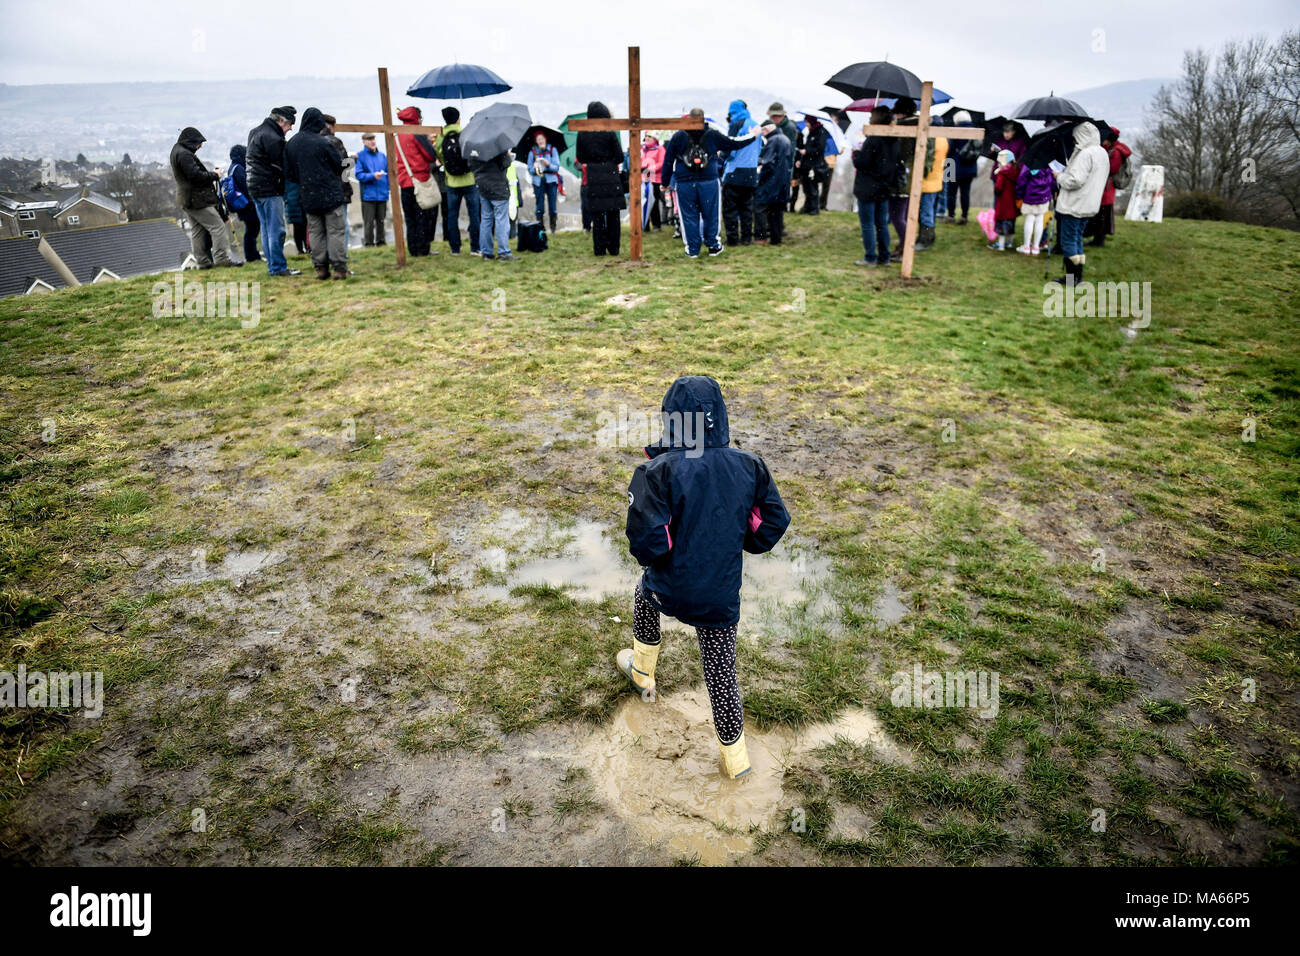 Three wooden crosses are placed on top of Roundhill in Bath, Wiltshire, where several Christian Church congregations attend a hill-top service after taking part in the Walk of Witness to imitate the journey that Jesus took carrying his cross through the streets of Jerusalem on Good Friday. Stock Photo